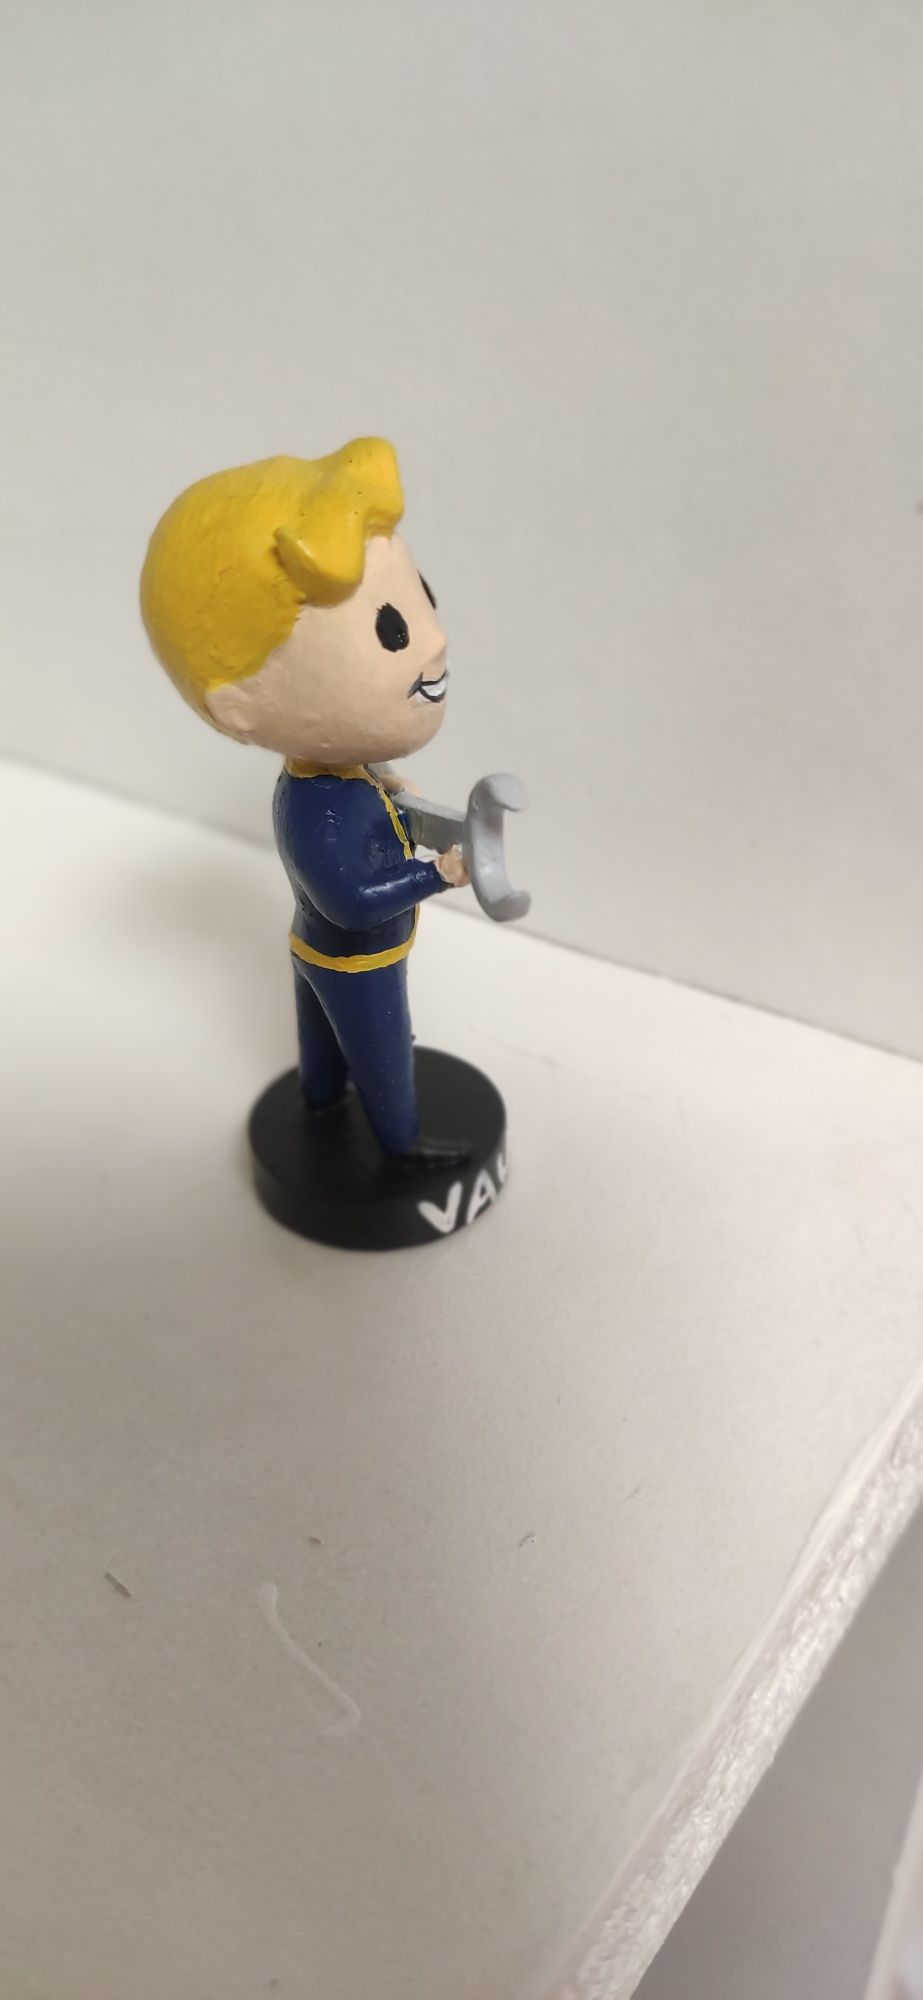 Vault Boy Фоллаут Fallout